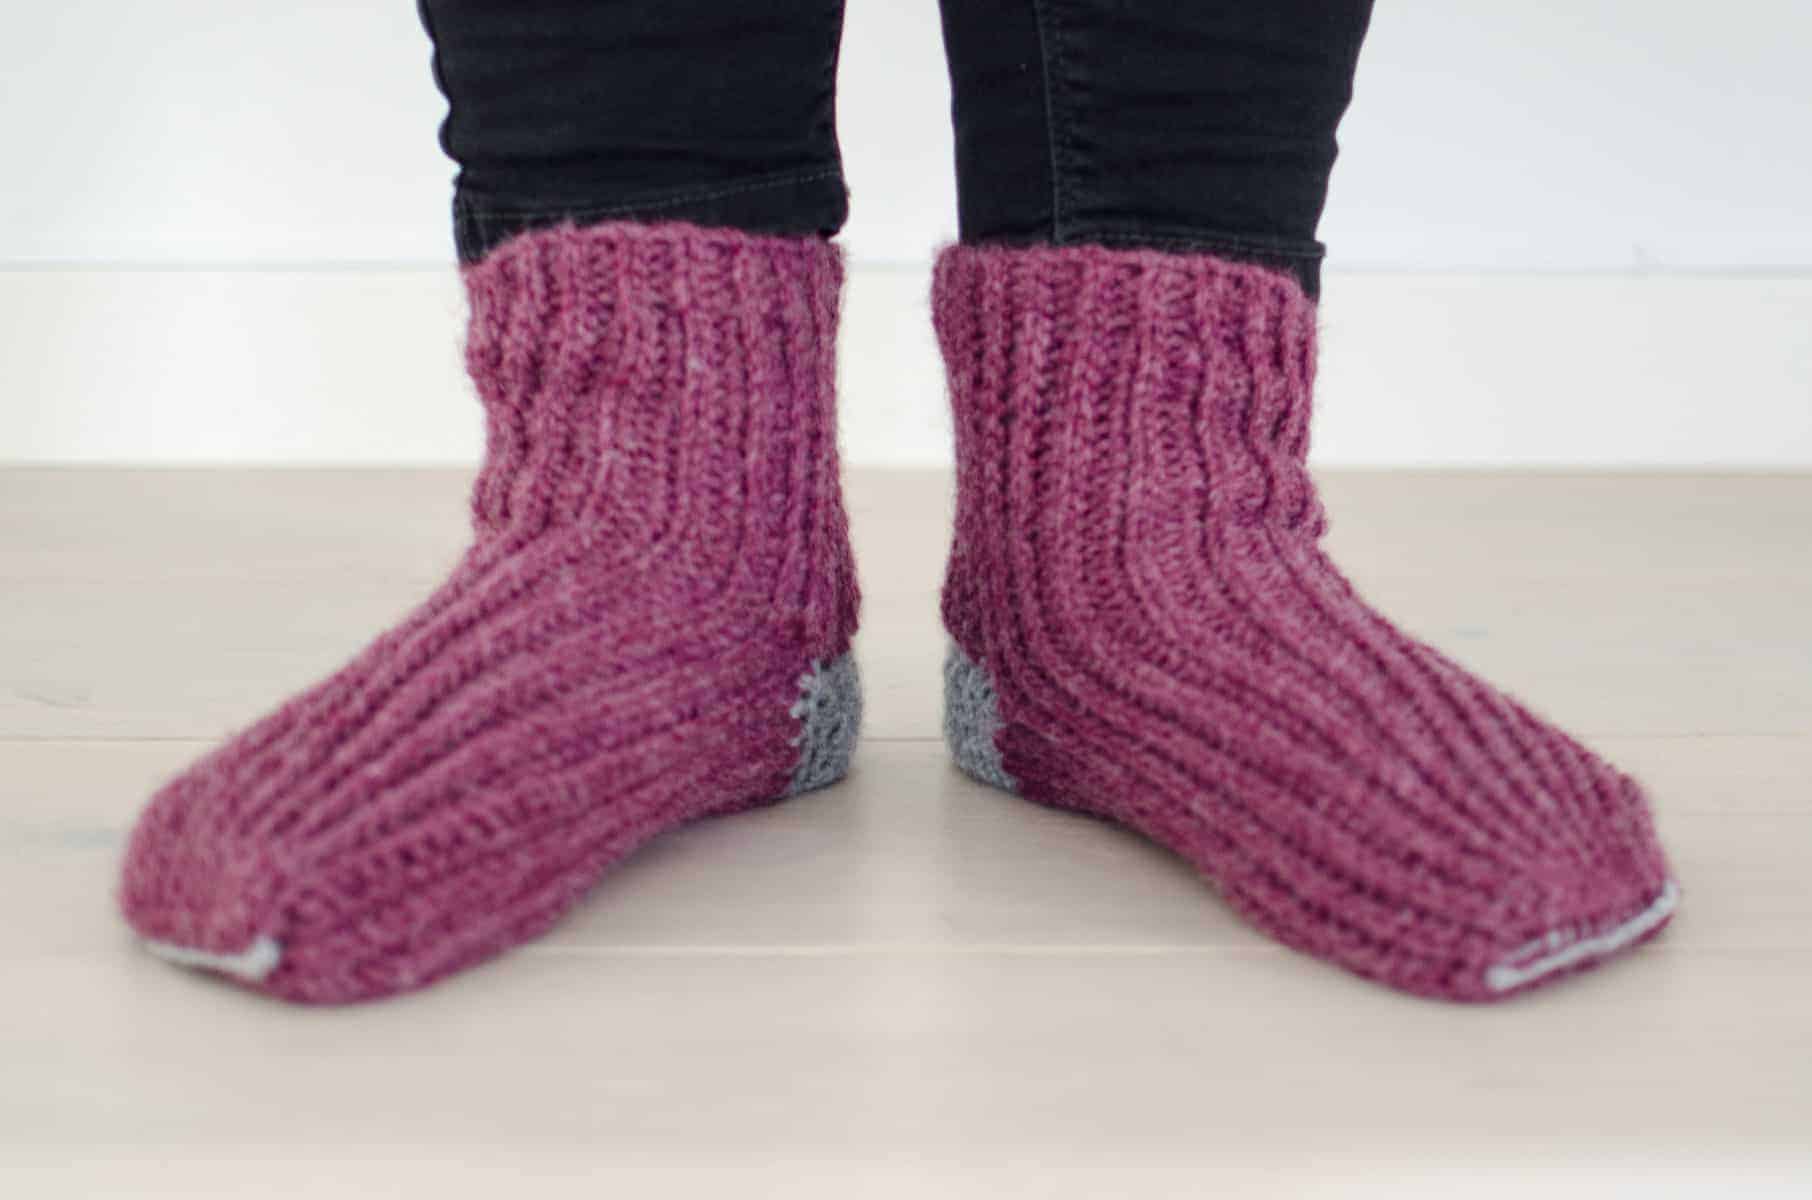 Leg Warmers - Free knitting patterns and crochet patterns by DROPS